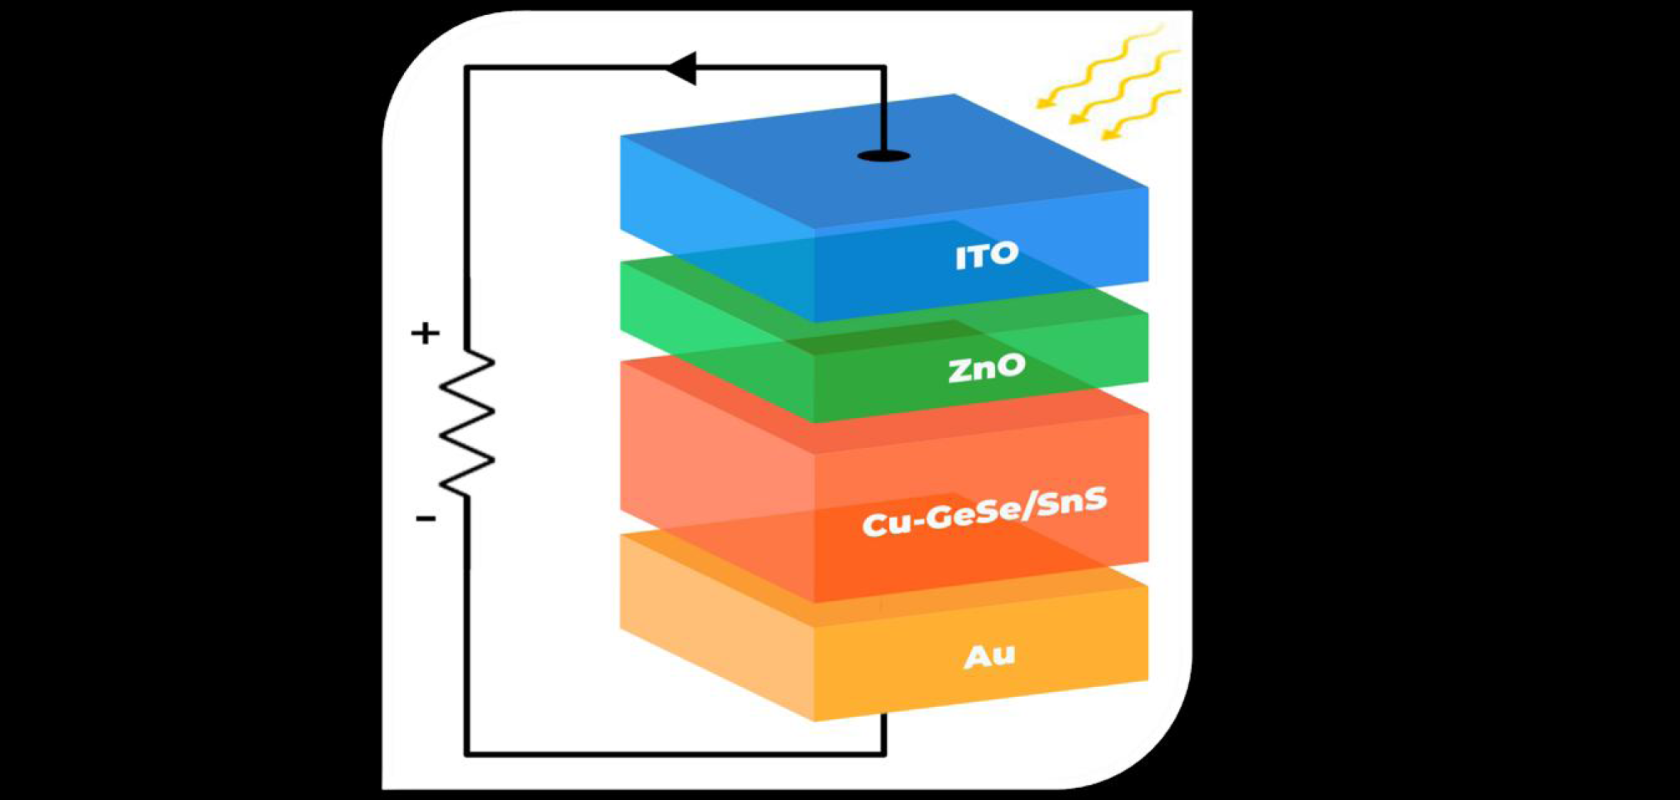 Schematic of the thin-film solar cell with CuxGeSe/SnS as the active layer